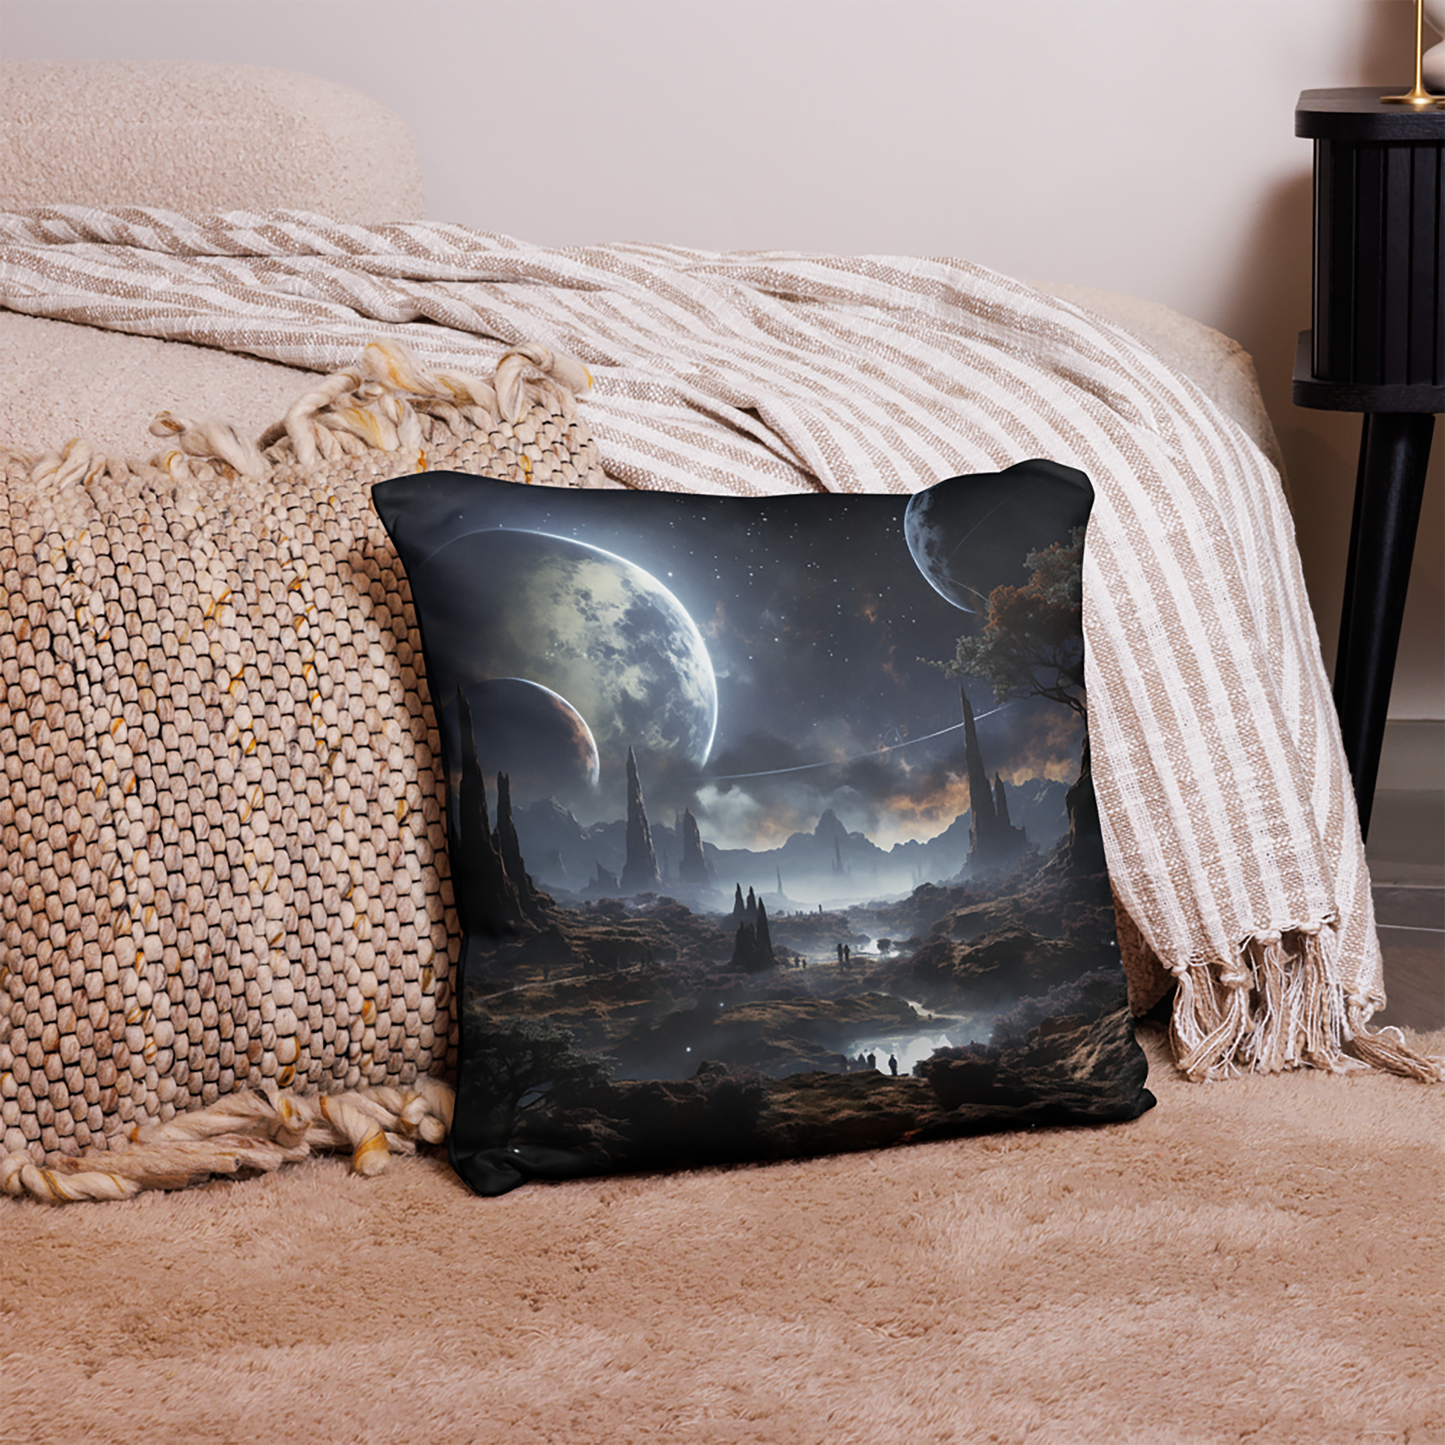 Space Throw Pillow Cosmic Alien Planet Landscape Polyester Decorative Cushion 18x18